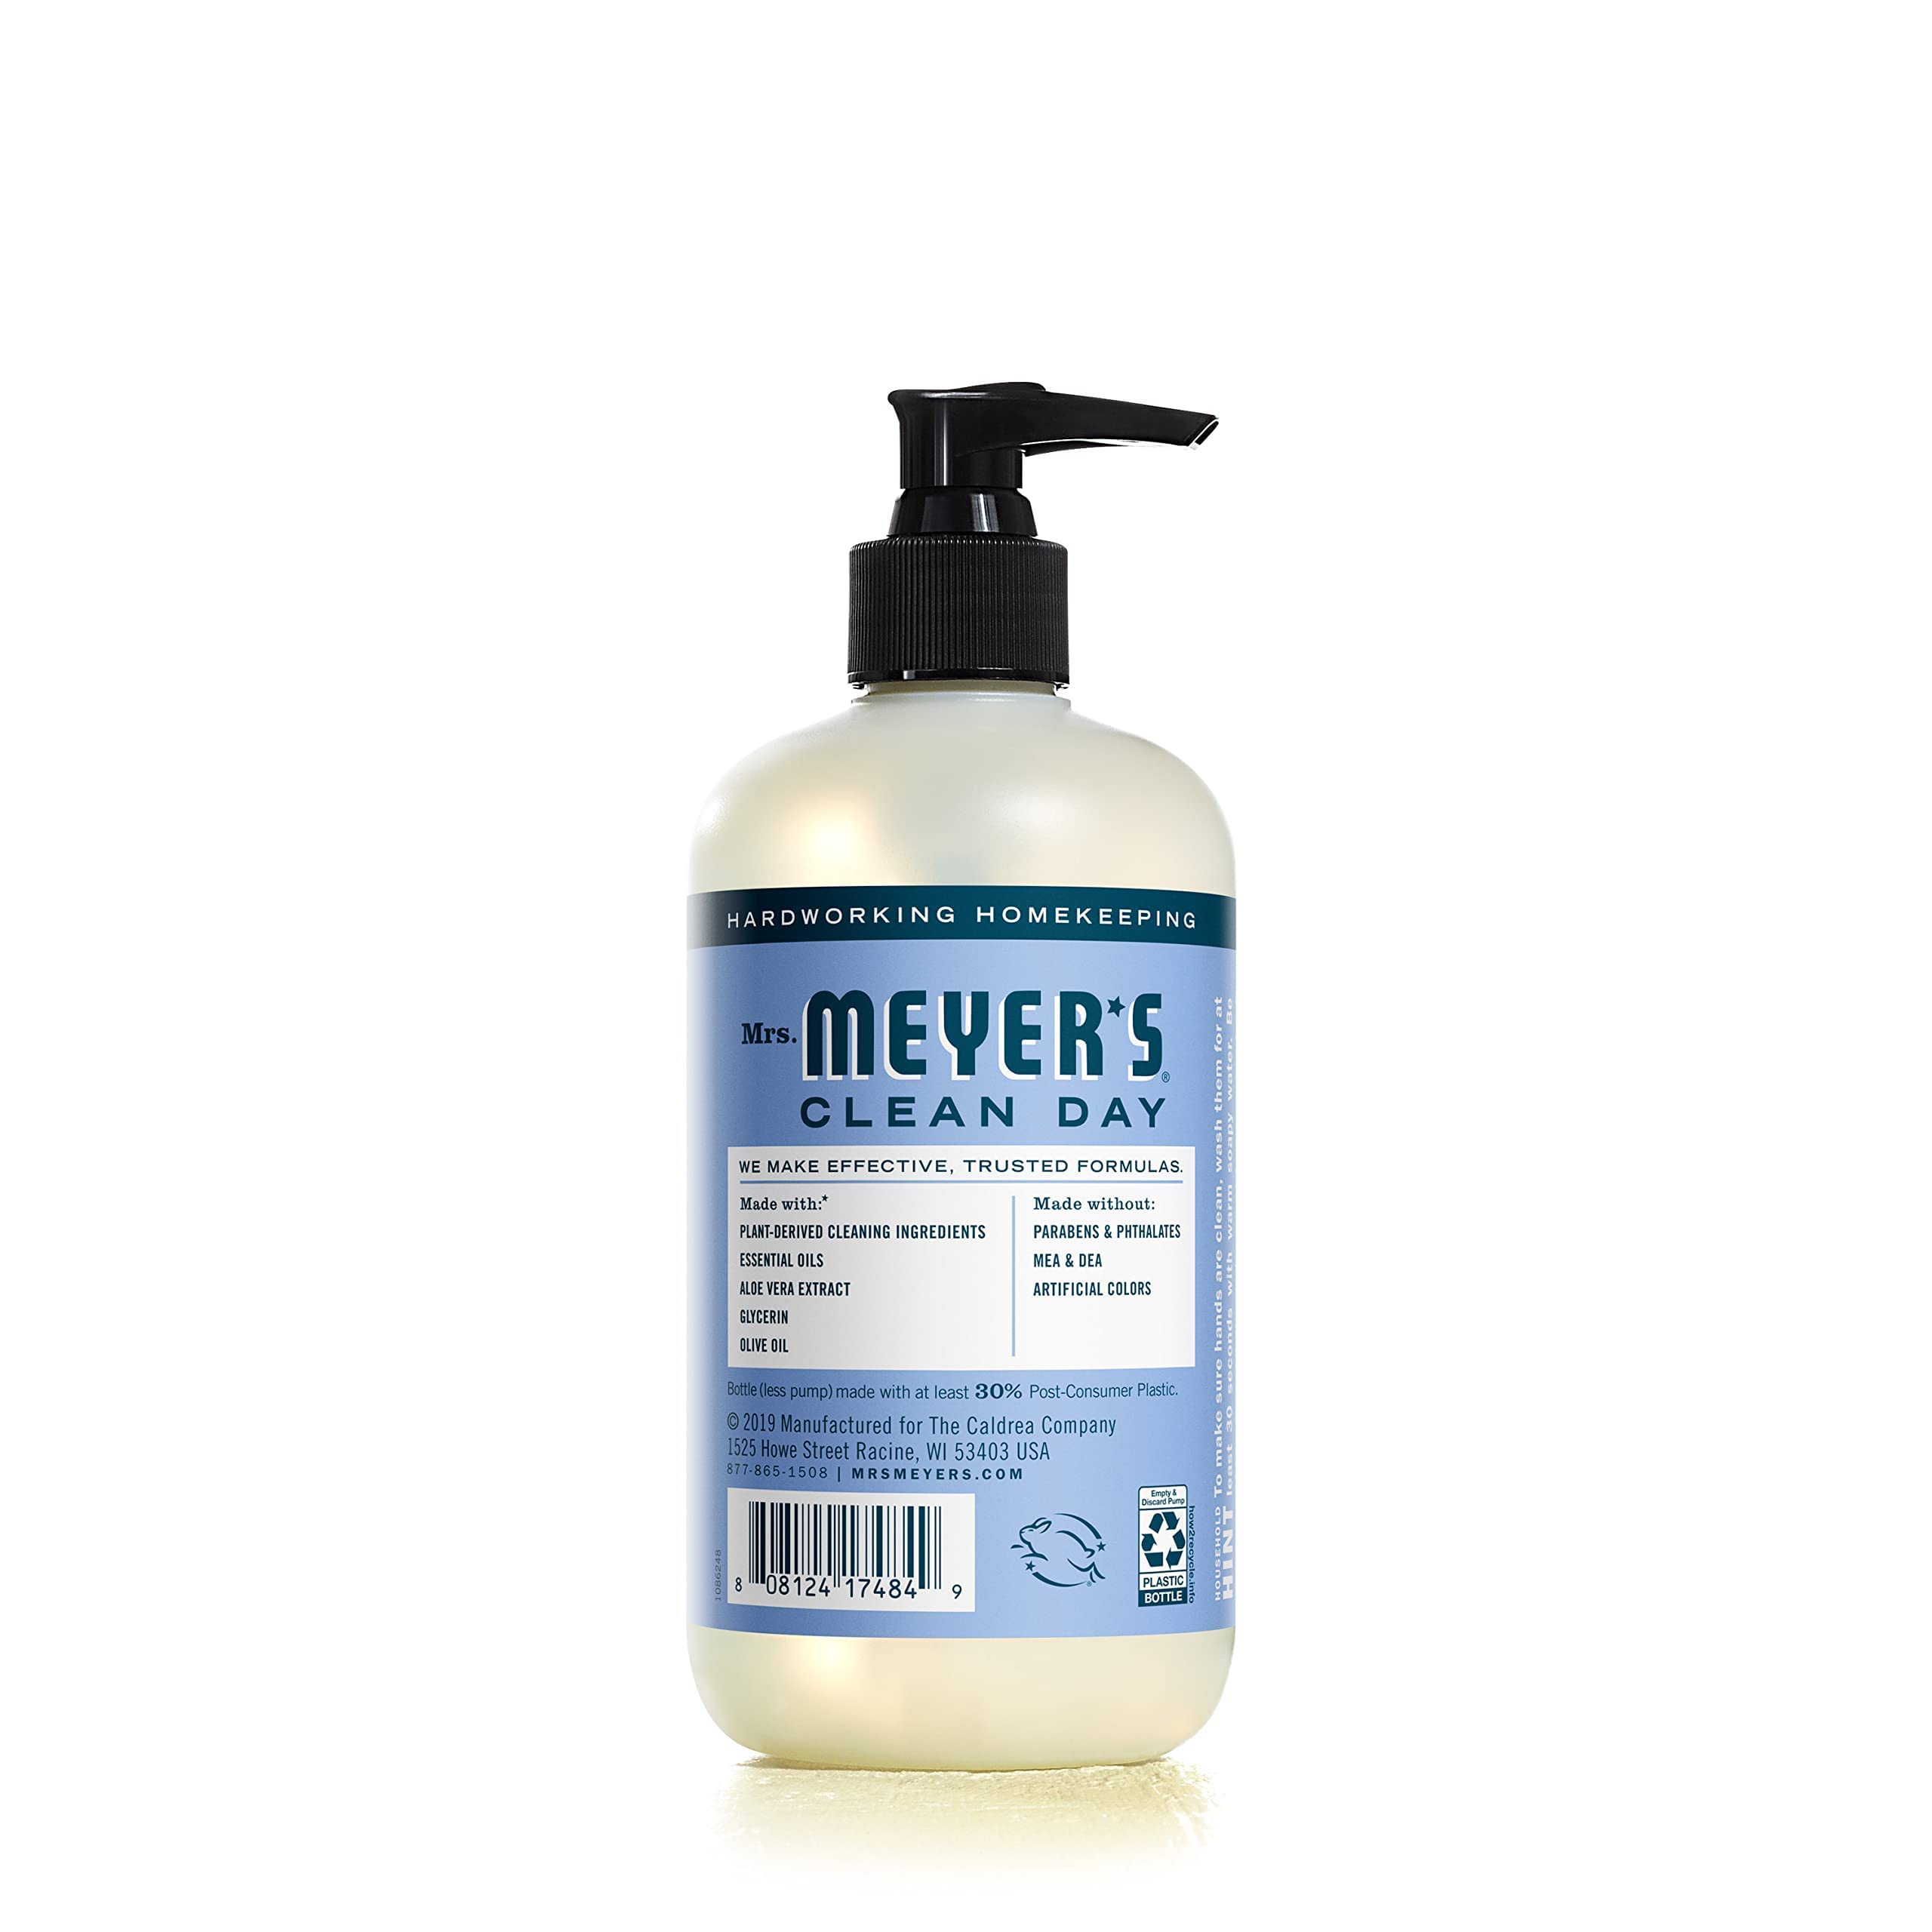 Mrs. Meyer's Hand Soap, Made with Essential Oils, Biodegradable Formula, Bluebell, 12.5 fl. oz